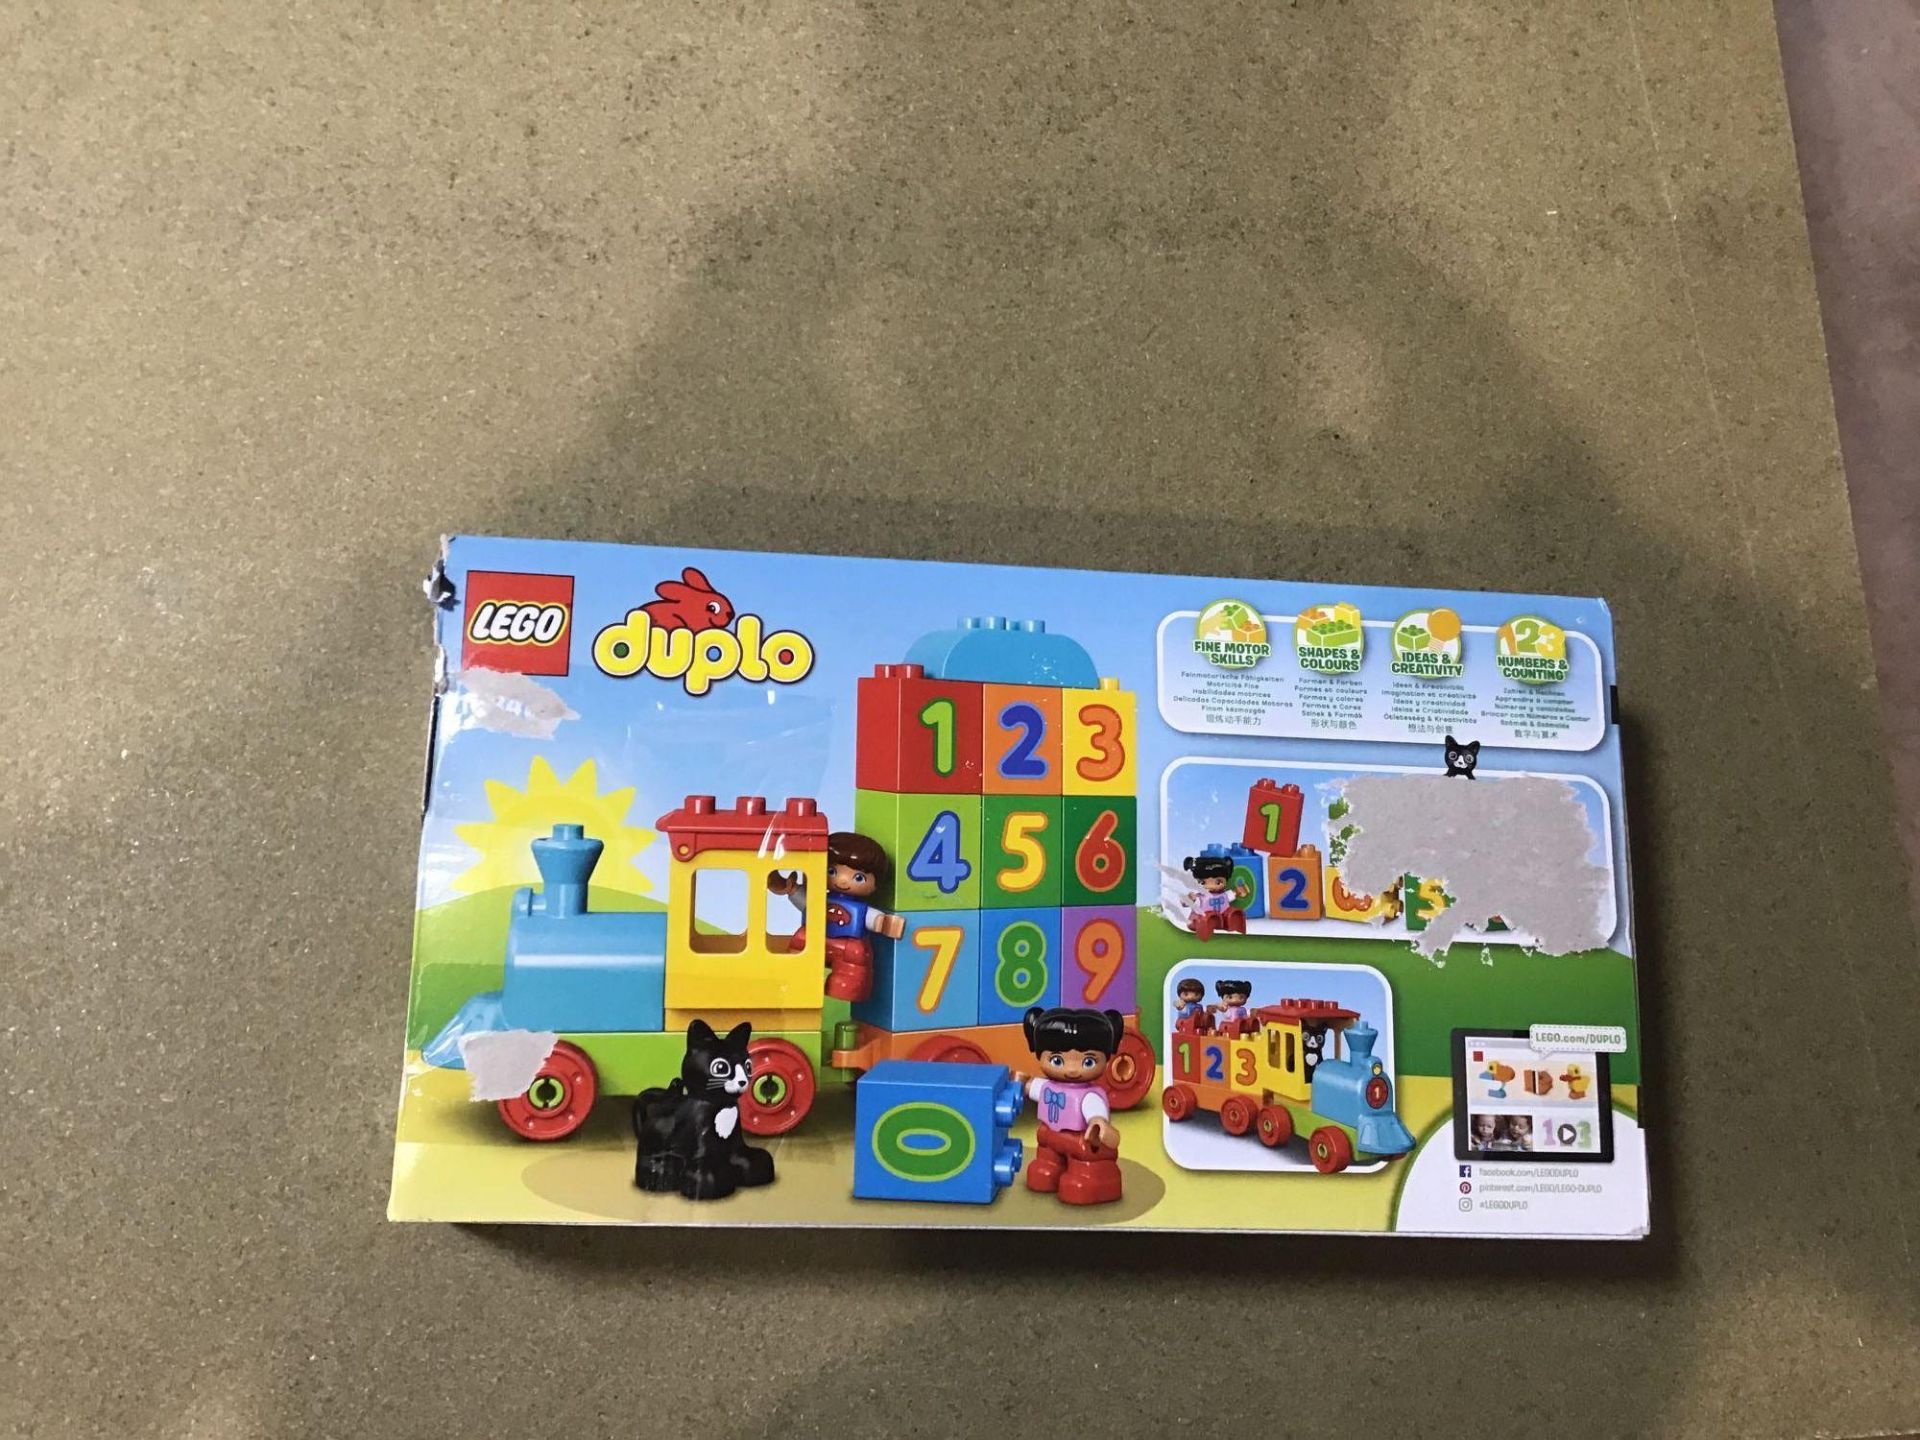 LEGO DUPLO My First Number Train Toy Building Set - 10847, £13.00 RRP - Image 2 of 6